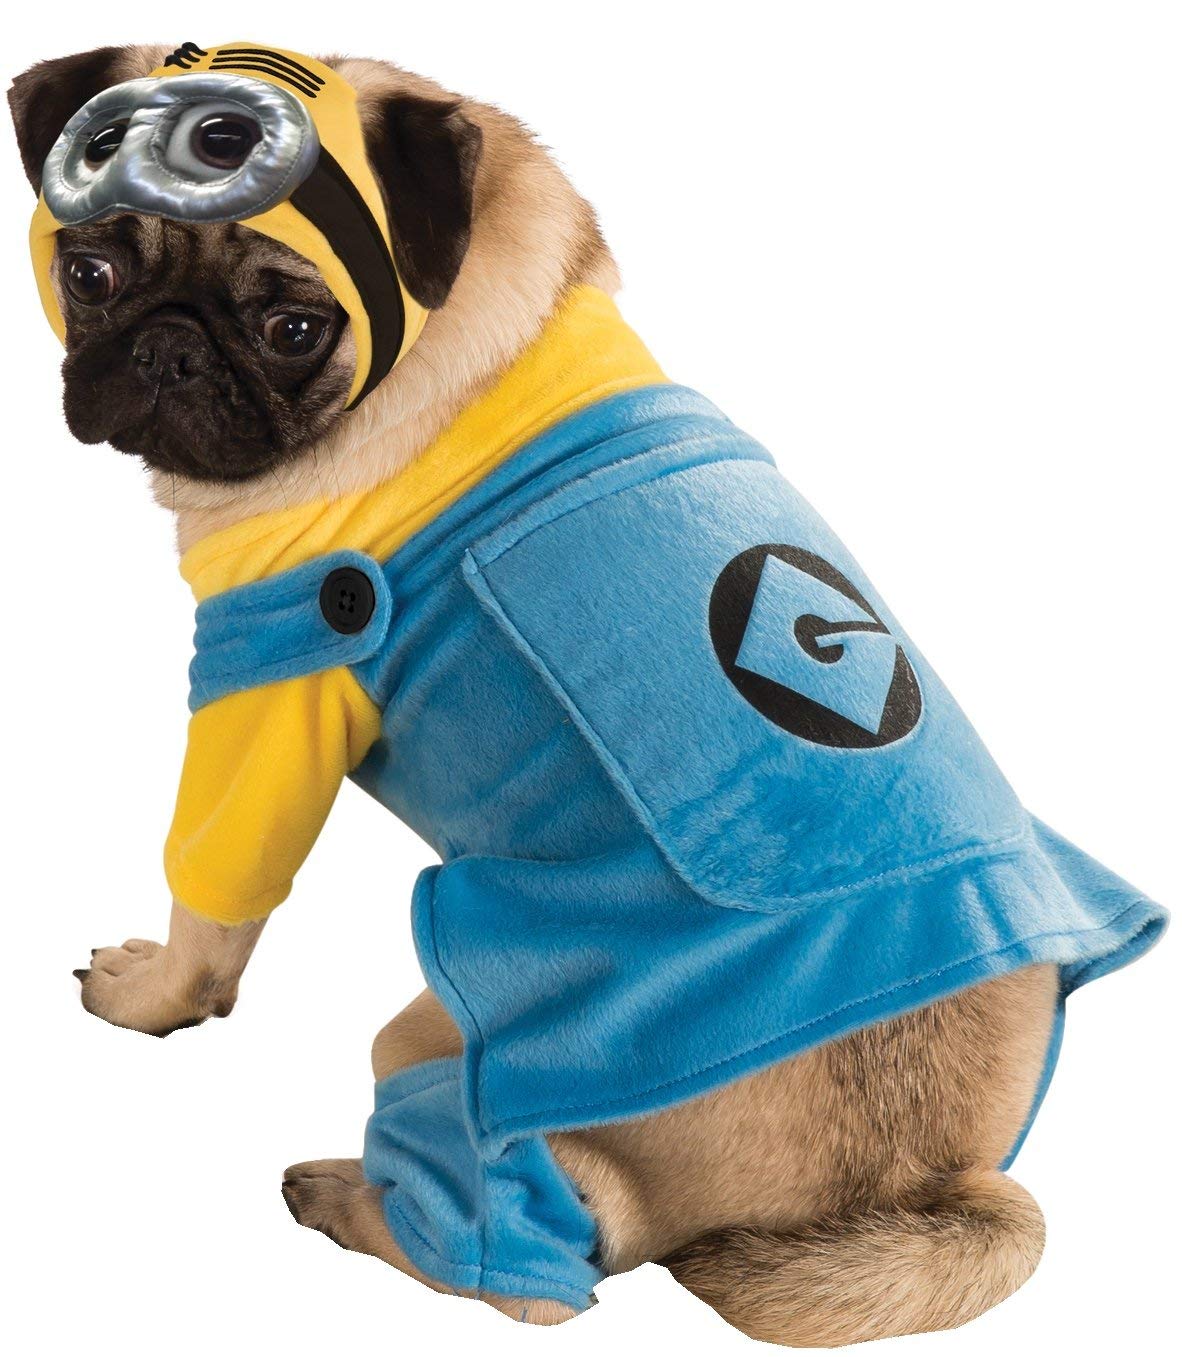 Pug sitting in an isolated white background wearing a minion costume